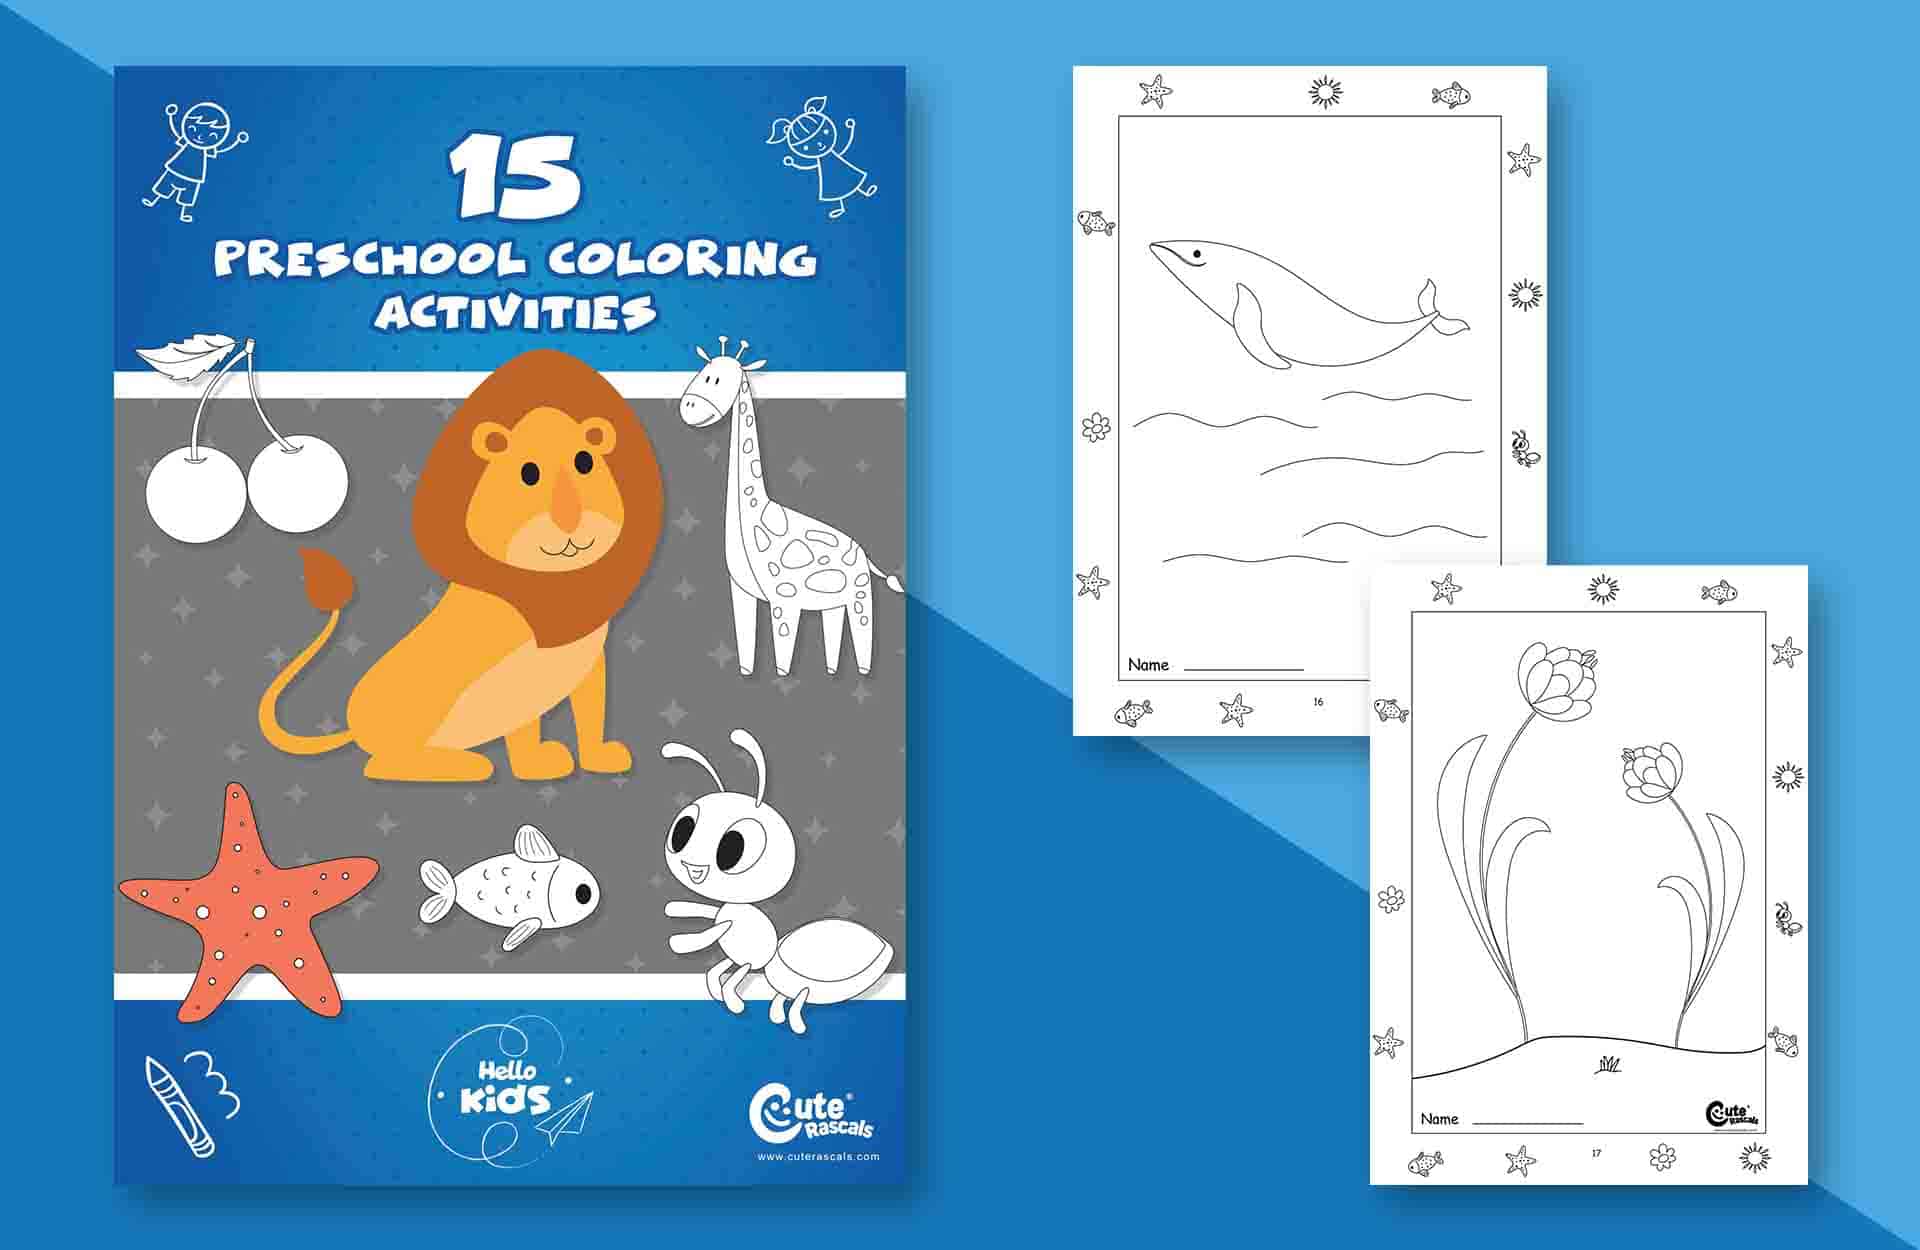 15 Simple Coloring Pages For Every Preschooler's Creativity